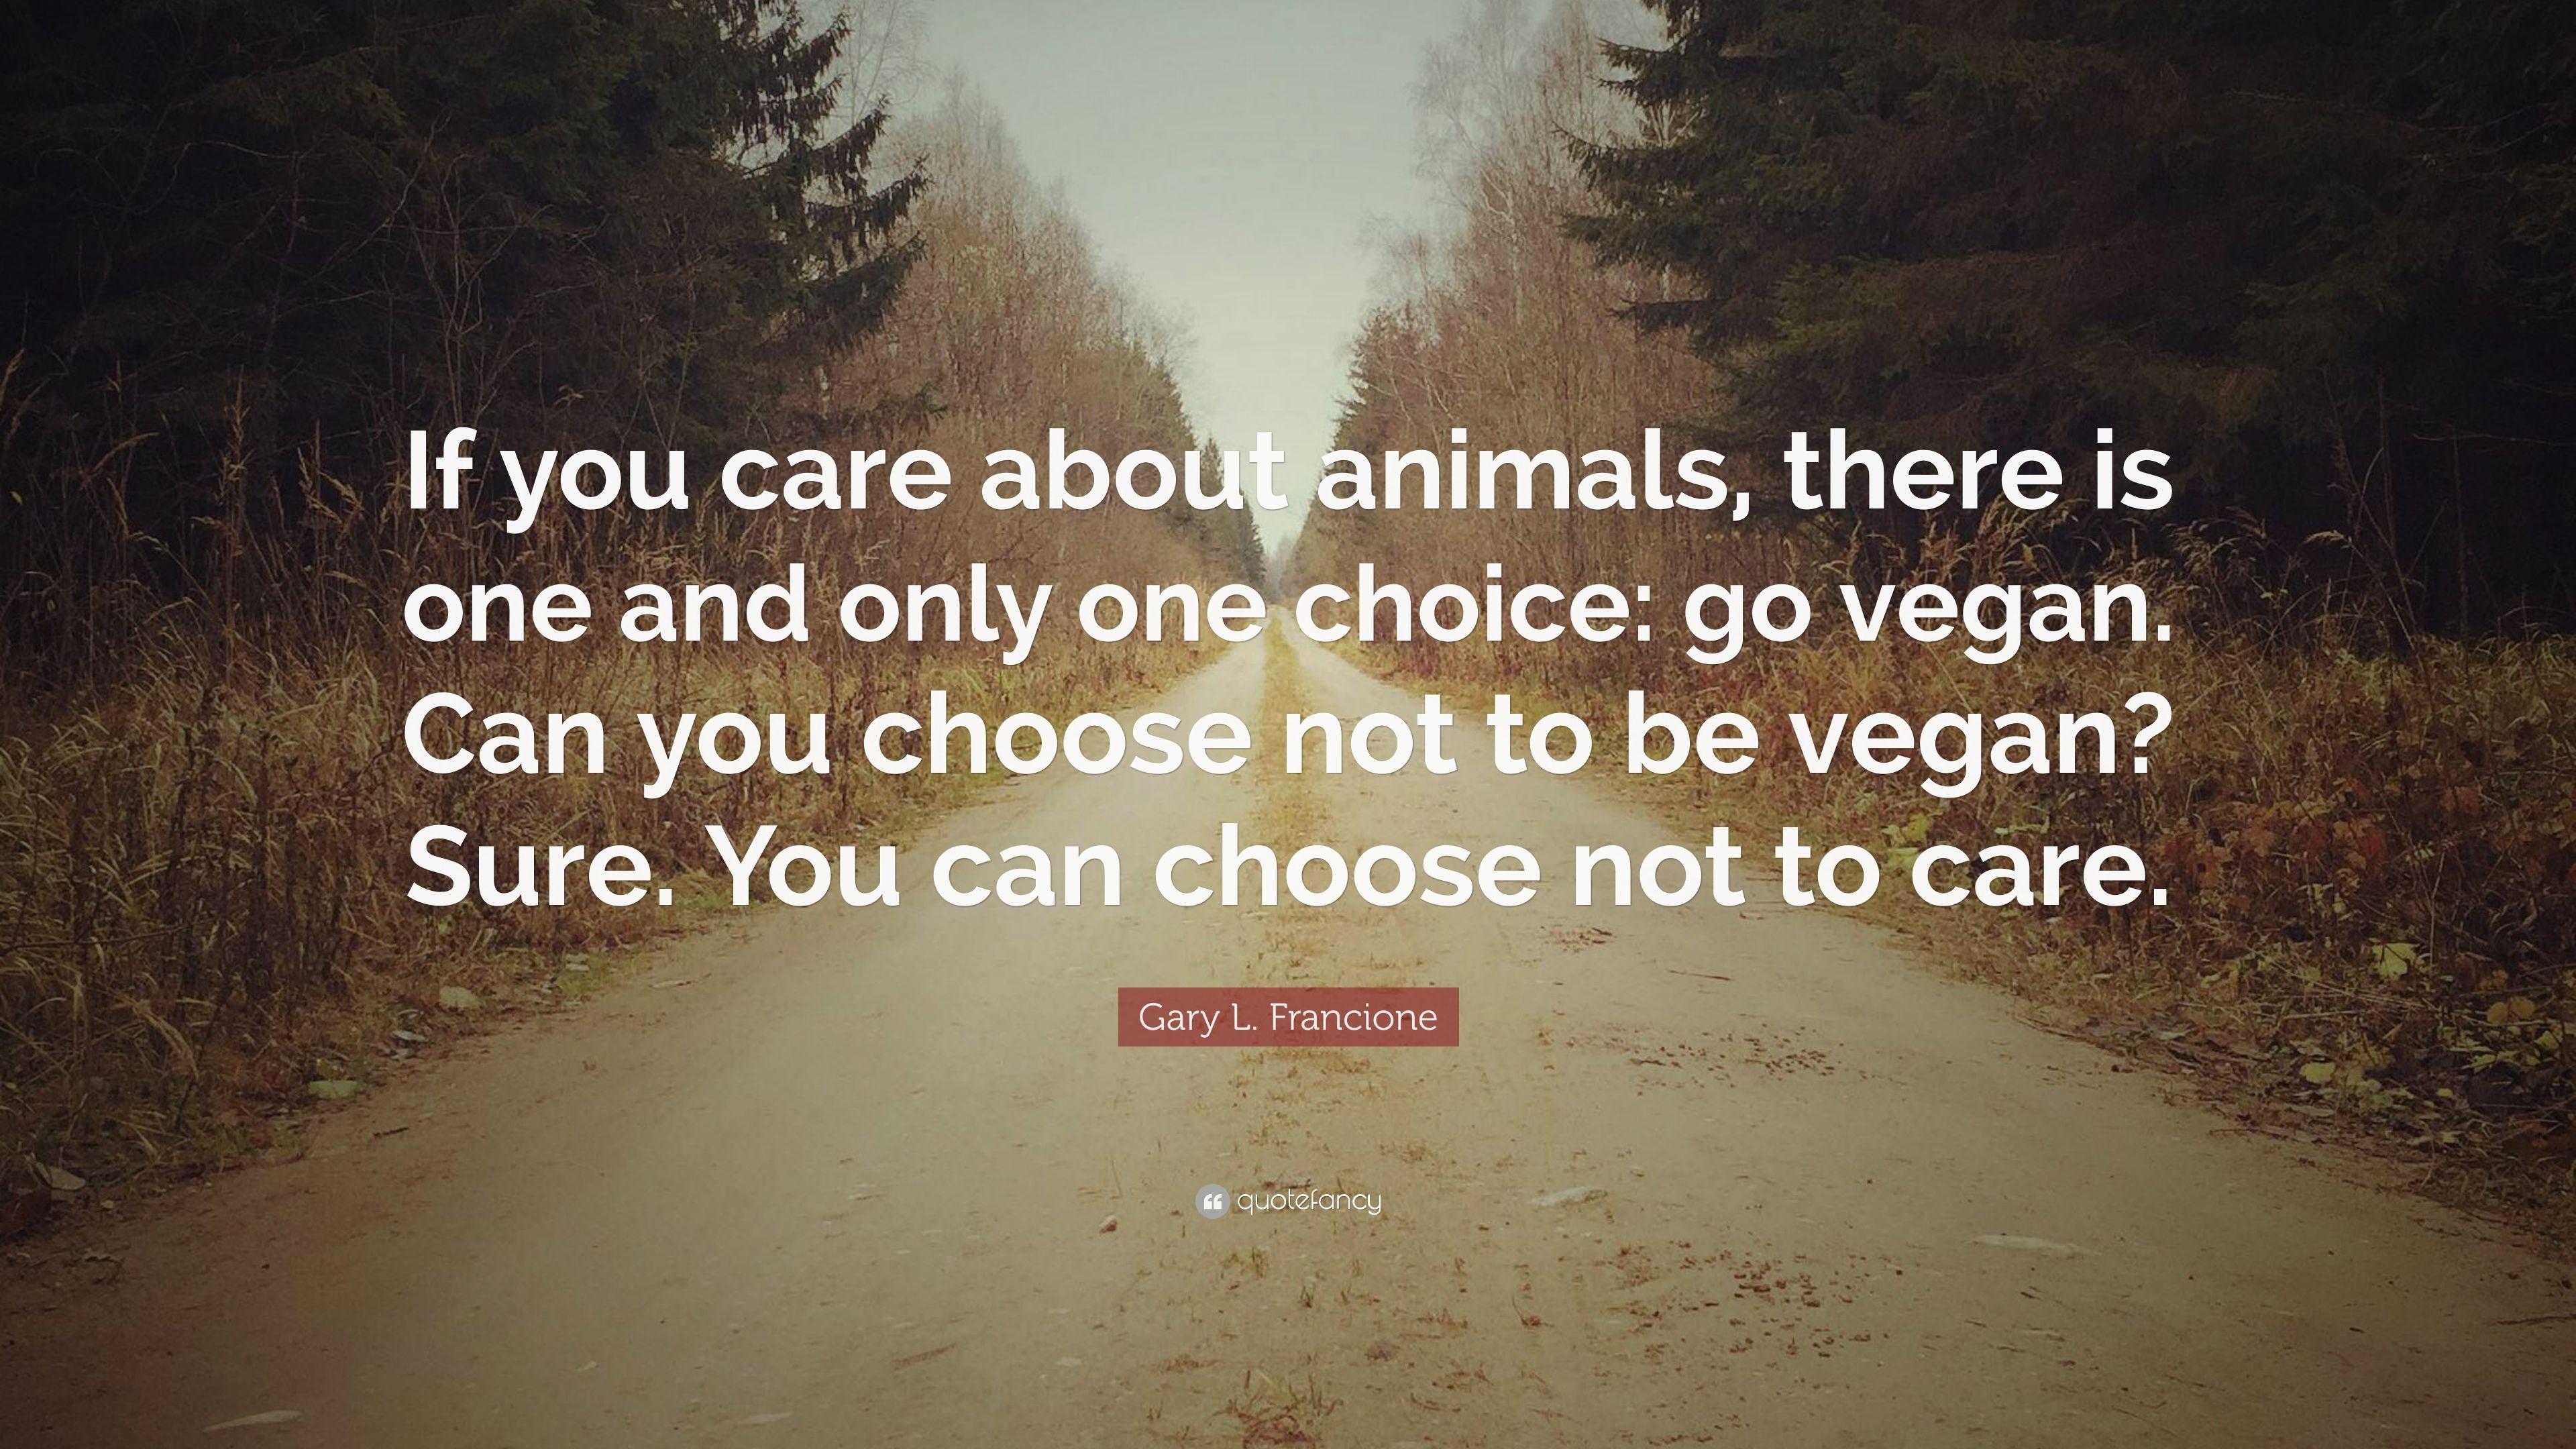 Gary L. Francione Quote: “If you care about animals, there is one